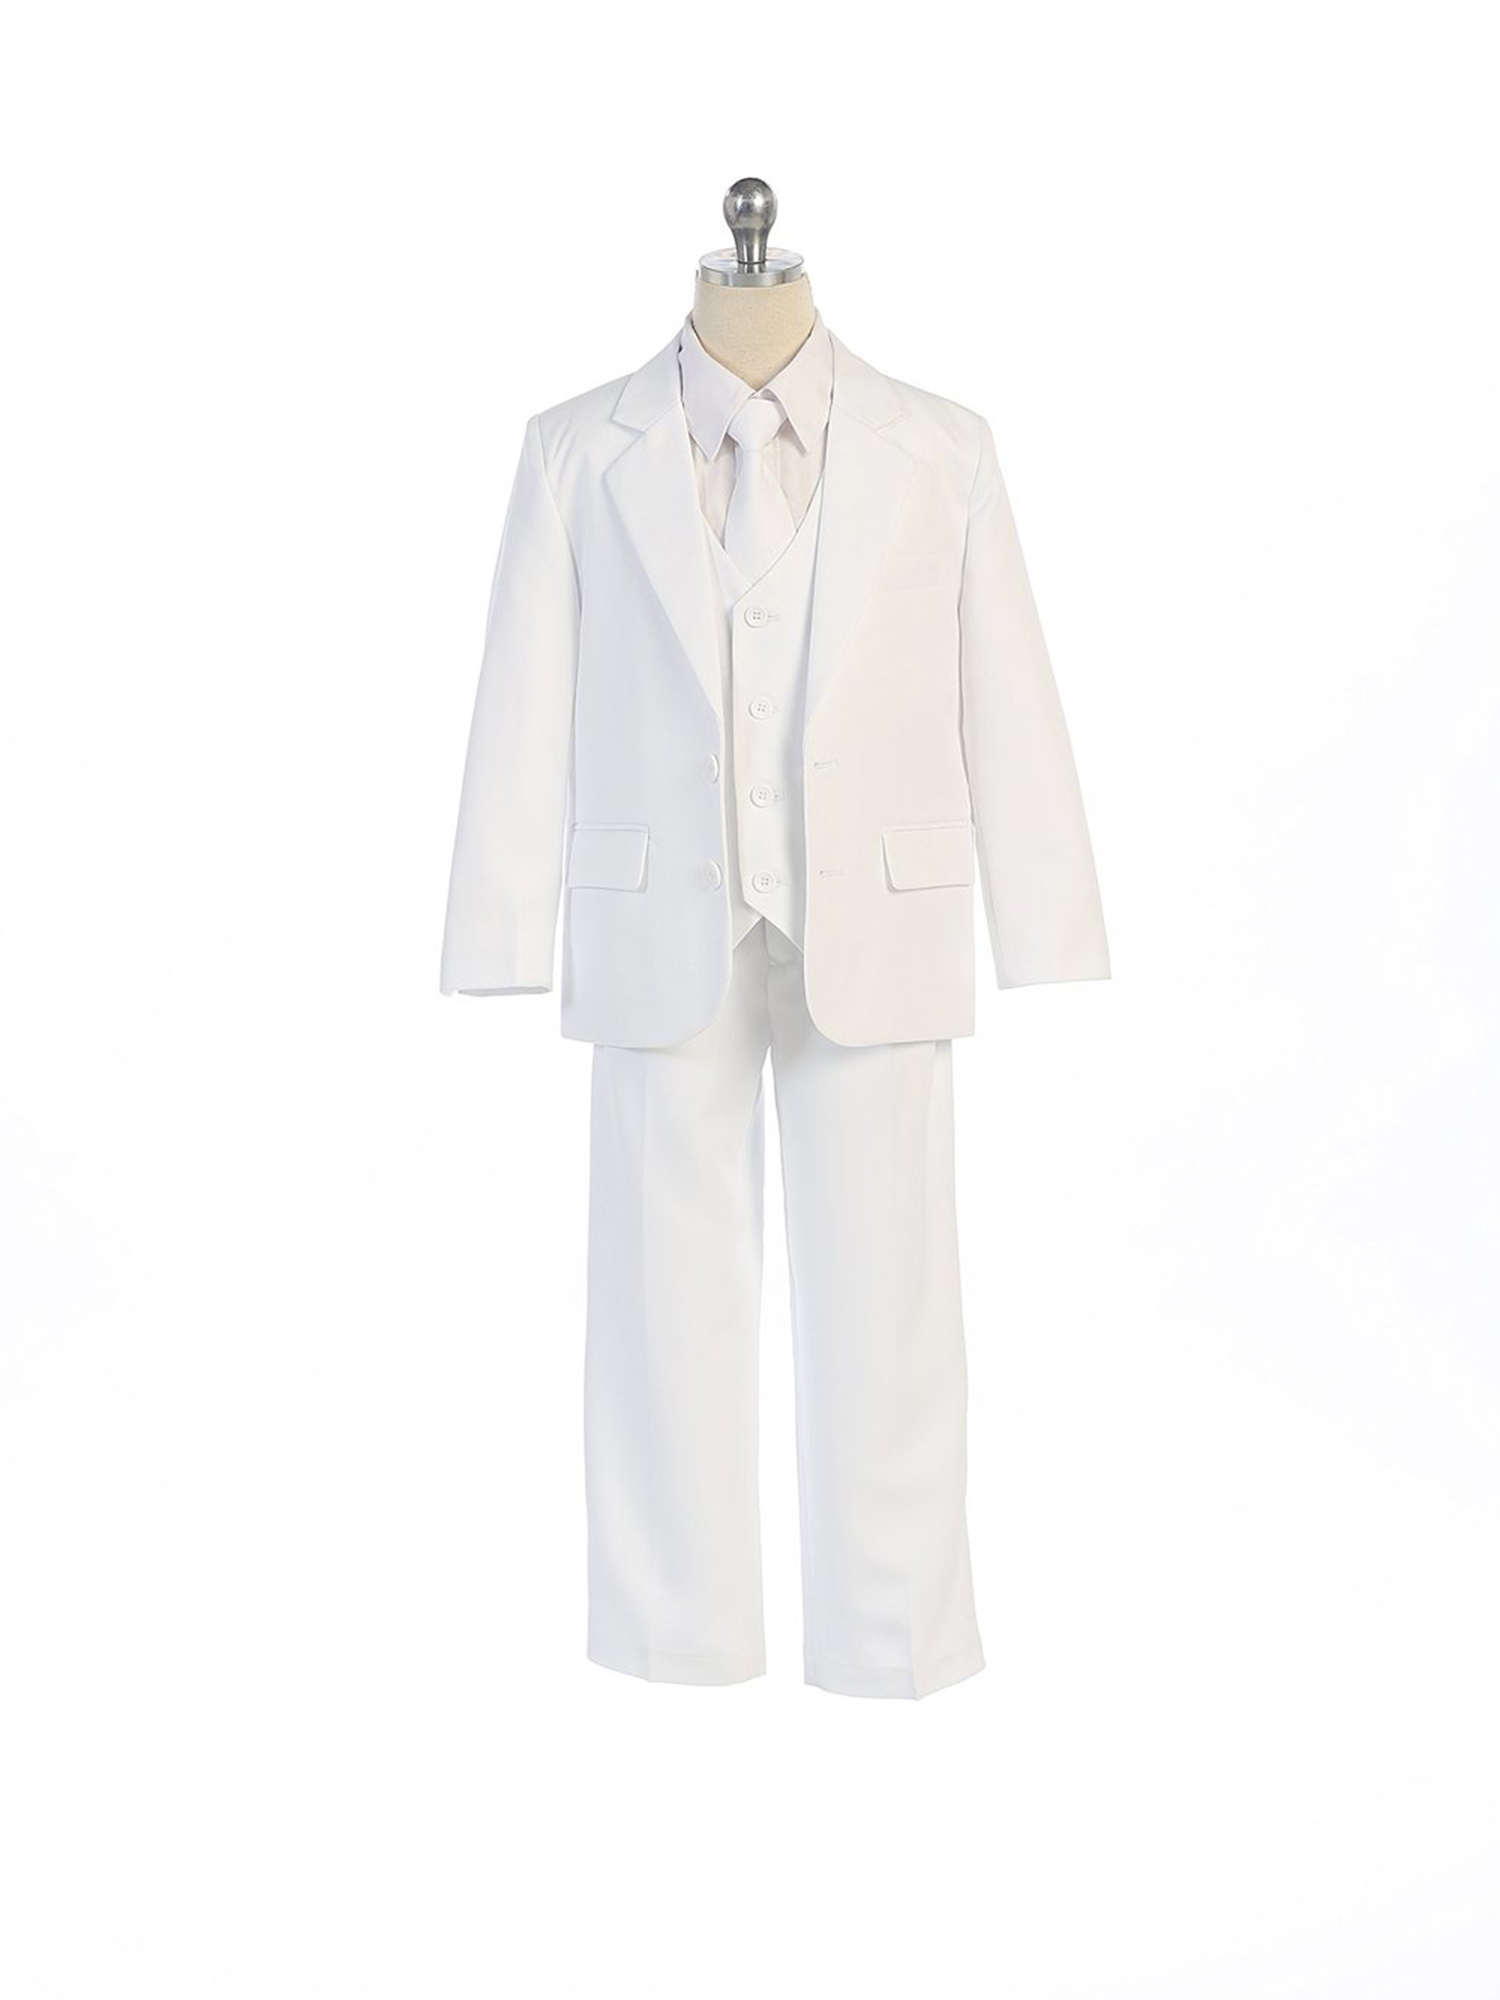 COLE Boys Suit with Shirt and Vest (5-Piece) - (12 Husky, White)